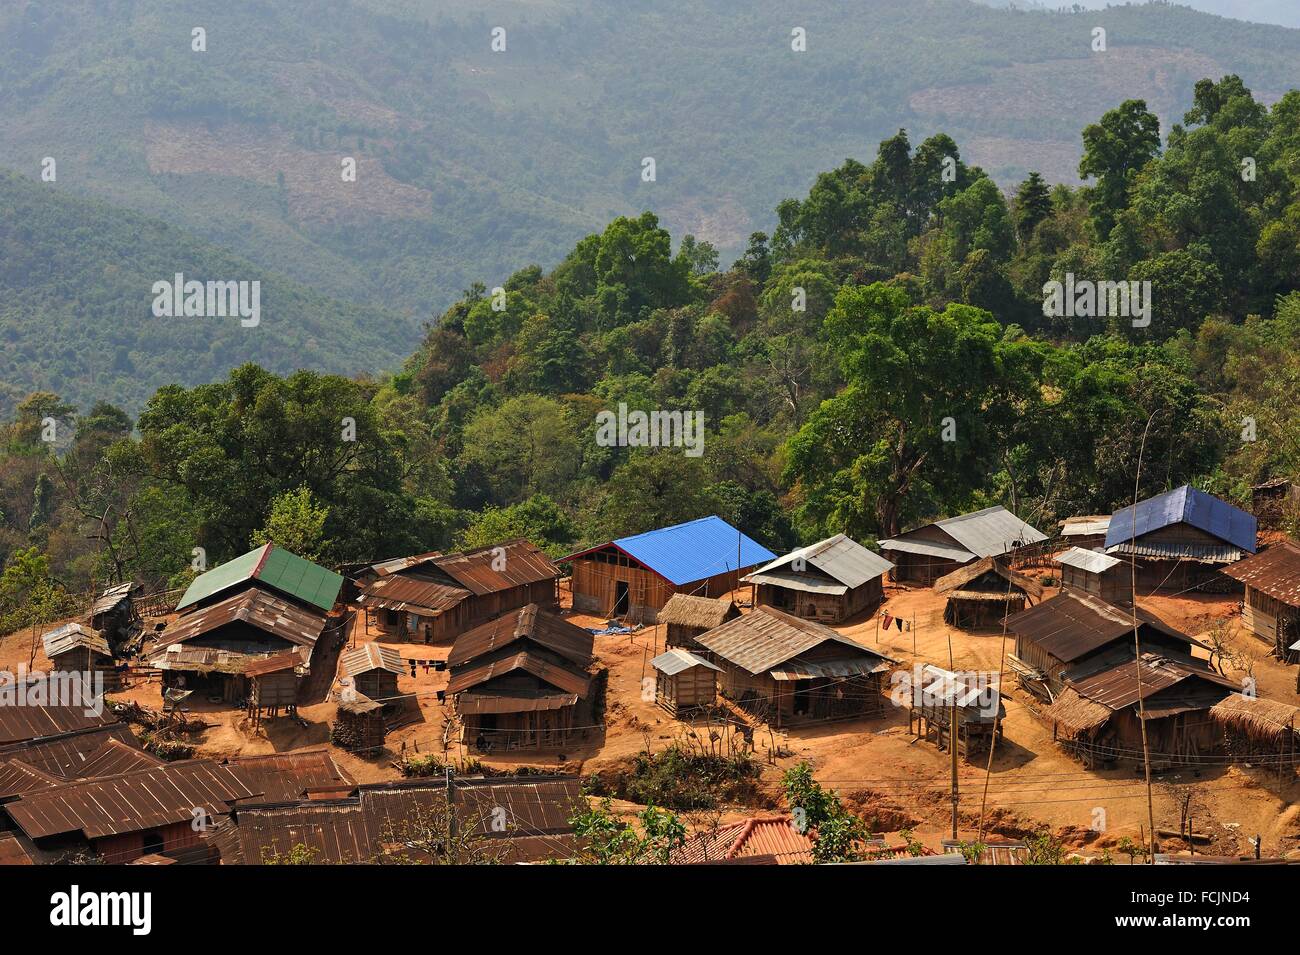 Akha Tribe Village In The Mountains Surrounding Muang La Oudomxay